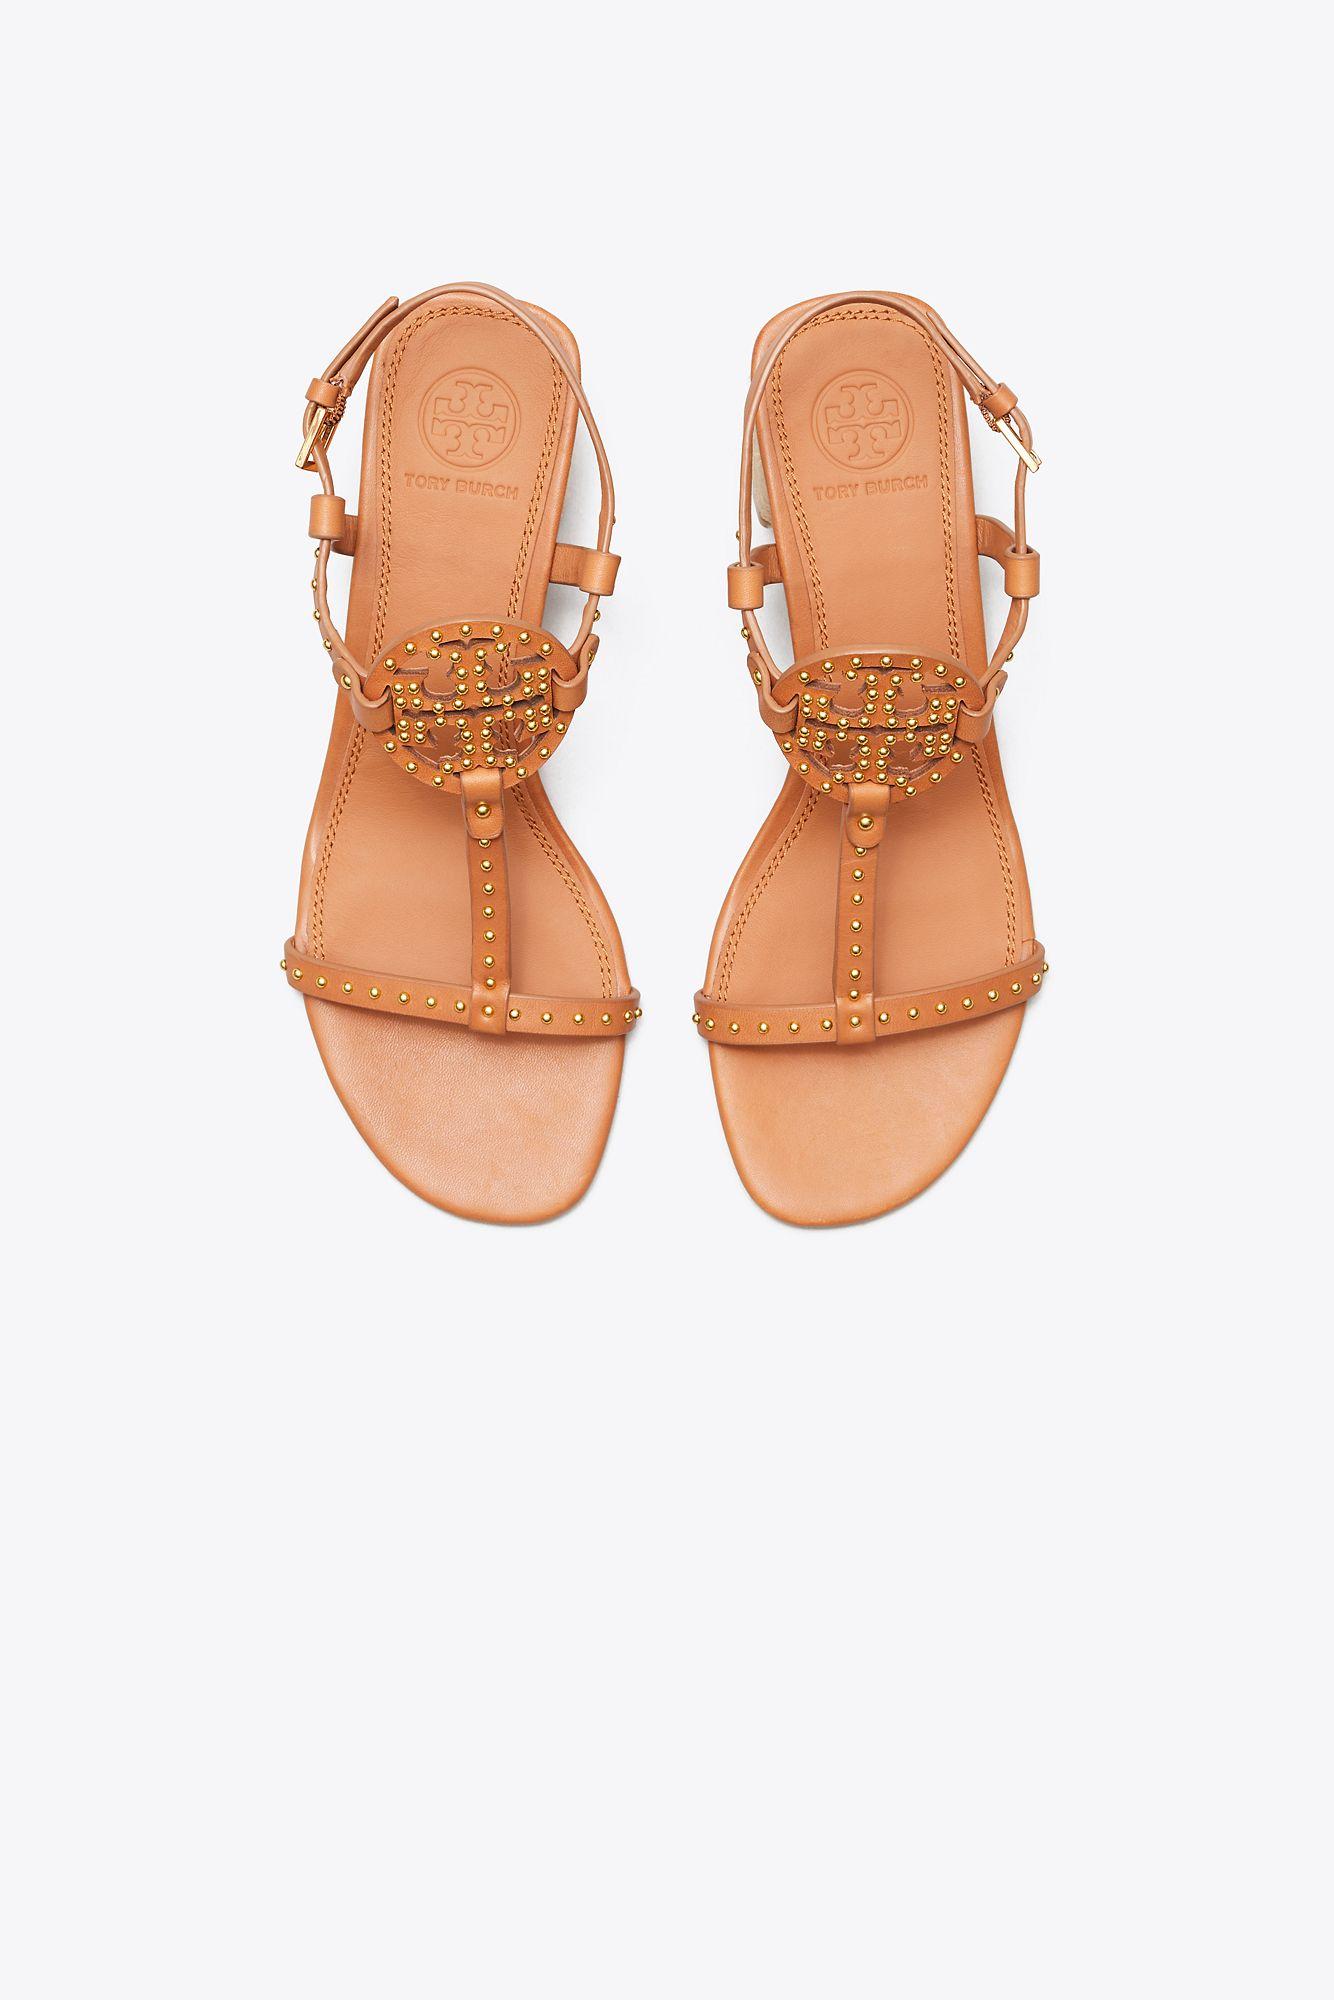 Tory Burch Leather Miller Studded Espadrilles Sandals in Tan (Brown) - Lyst